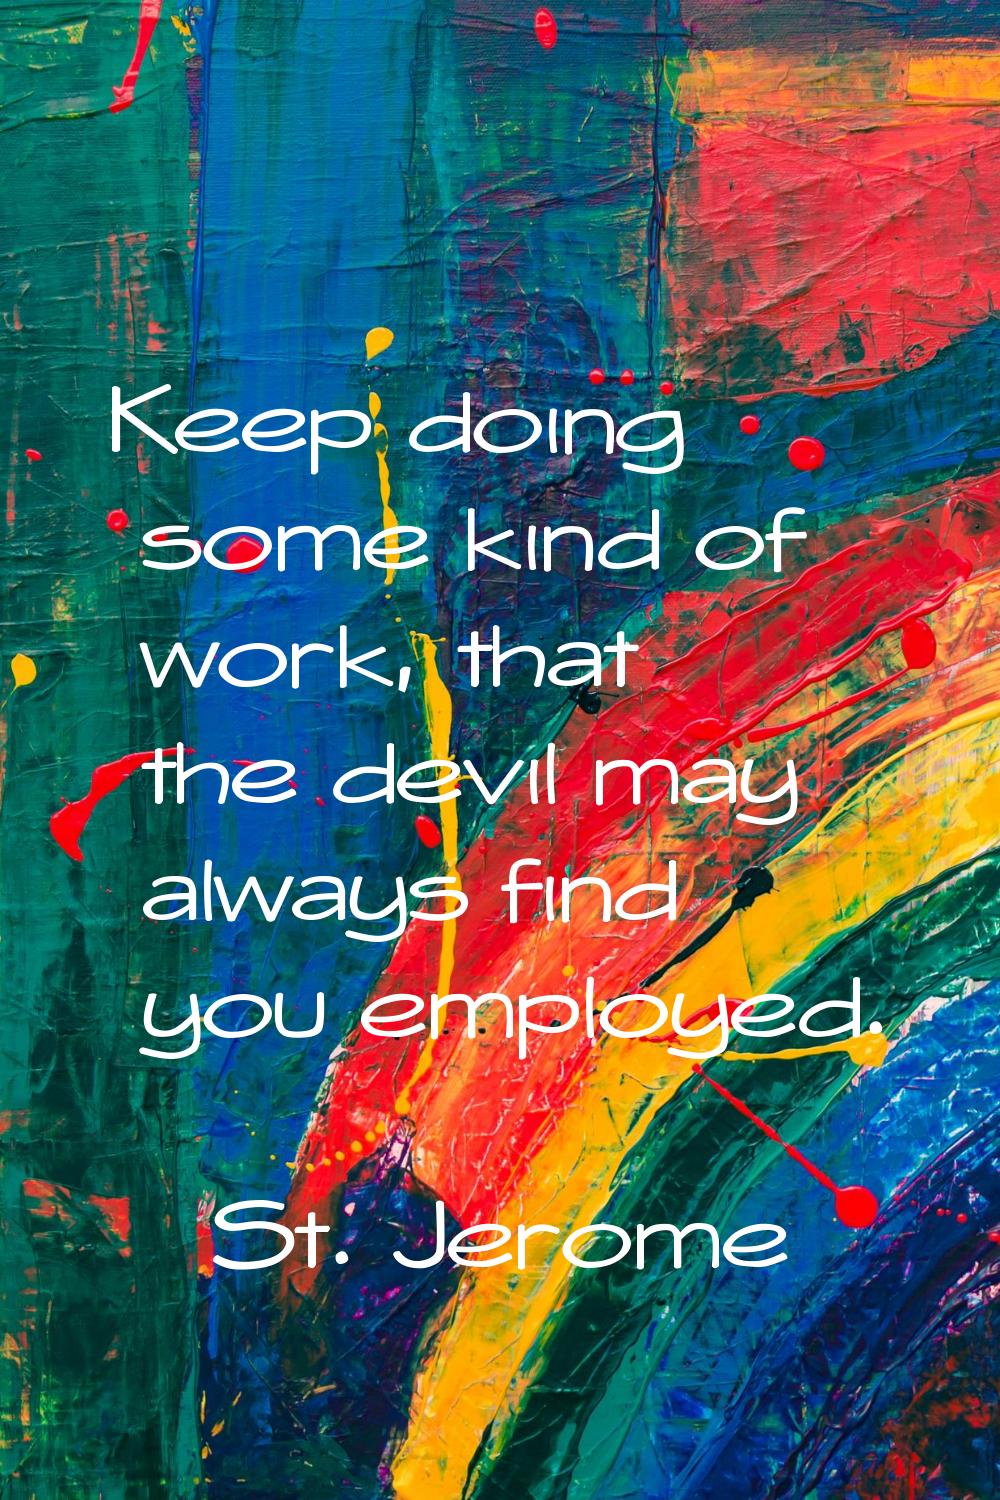 Keep doing some kind of work, that the devil may always find you employed.